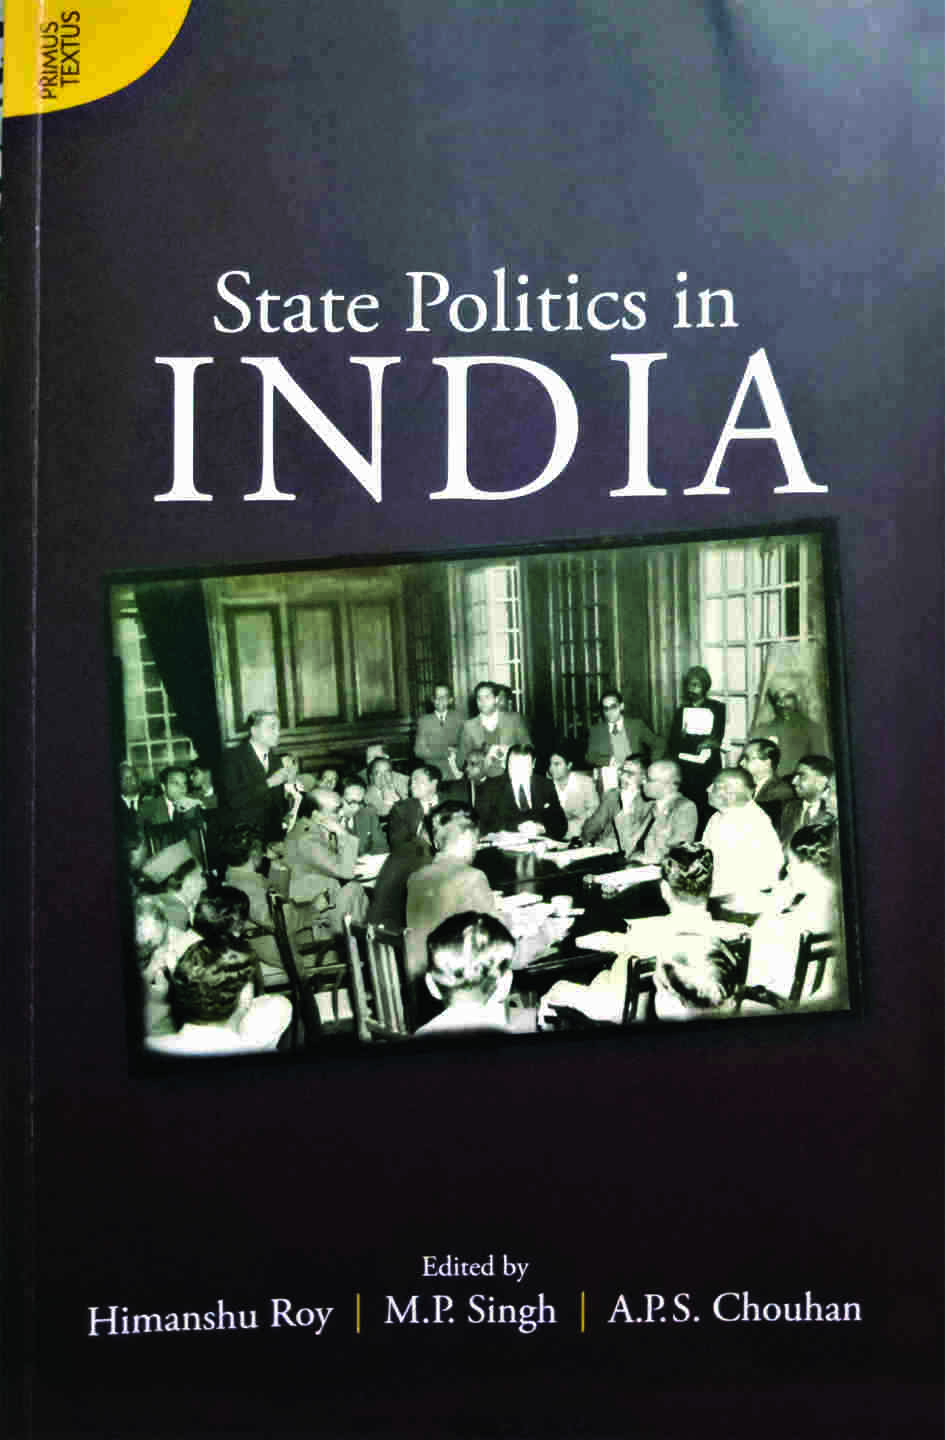 Greater depths of state politics in India